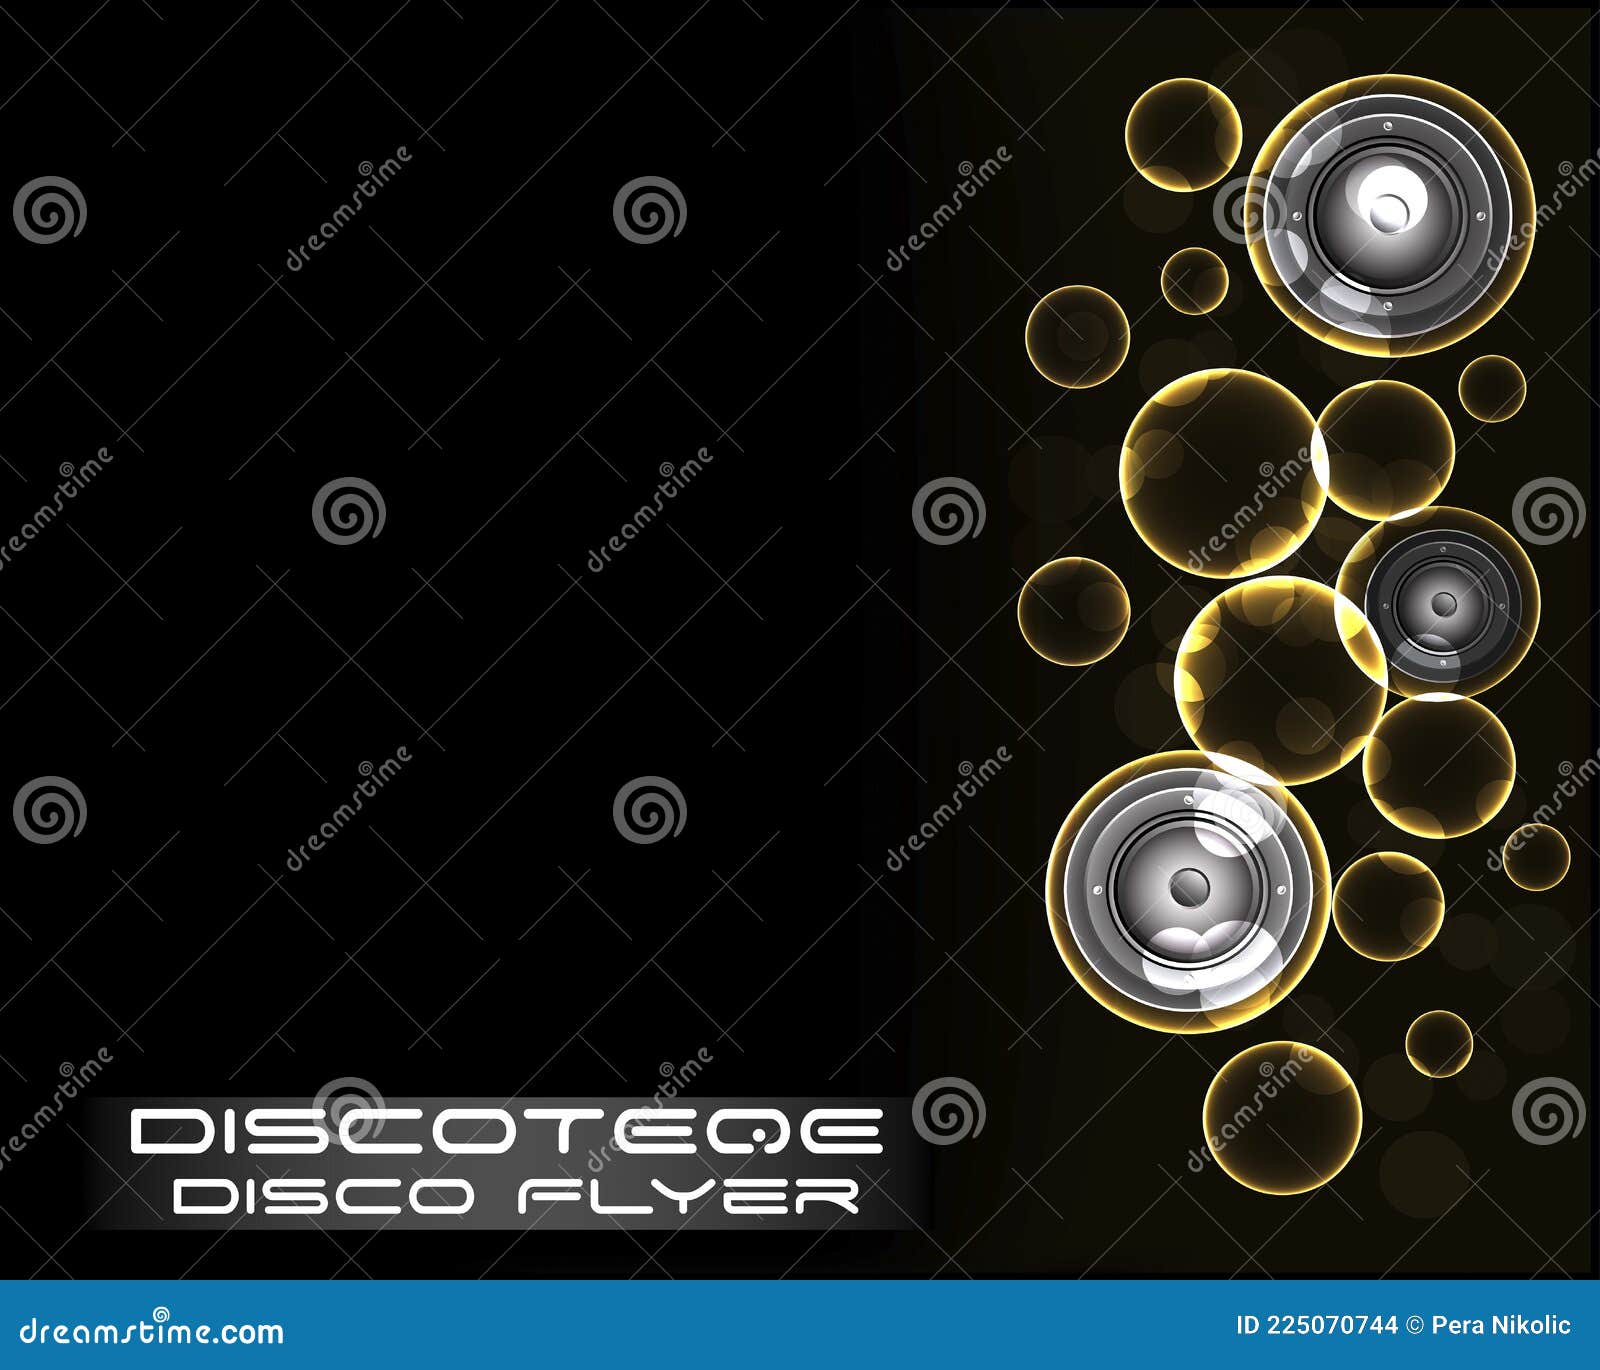 Disco Club Flyer Template For Your Music Nights Event Stock Vector Illustration Of Design Clubbing